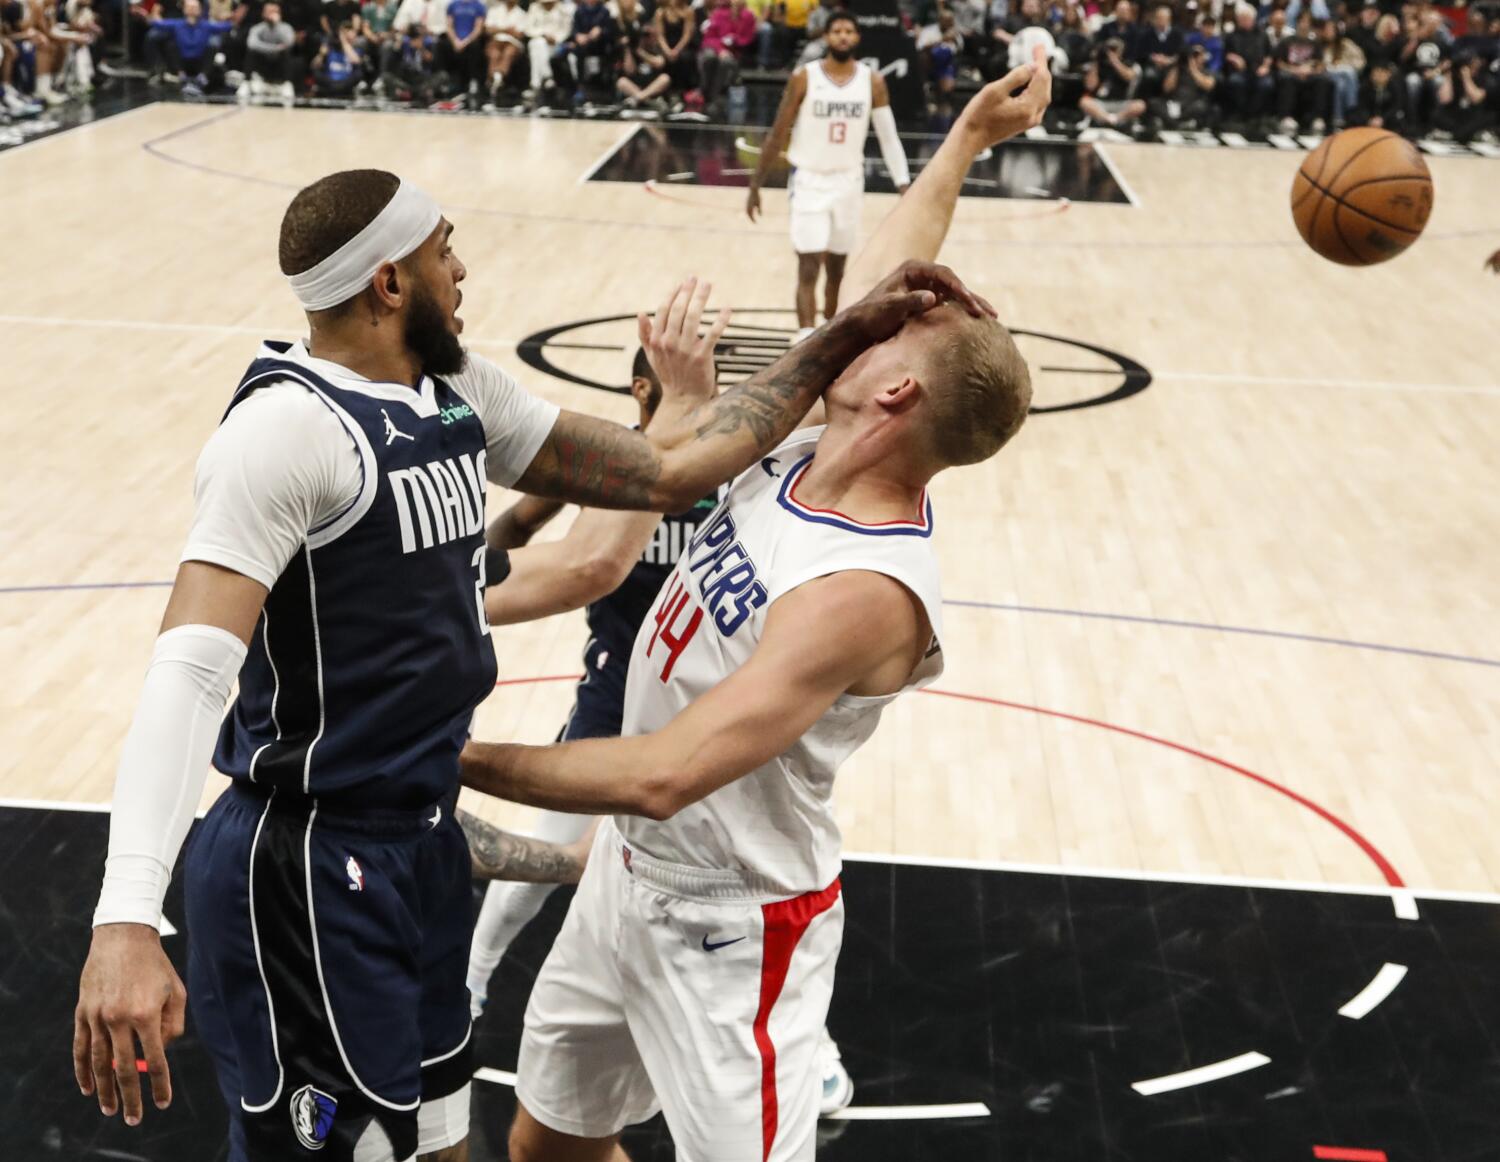 clippers-on-brink-of-playoff-elimination-after-losing-game-5-to-mavericks